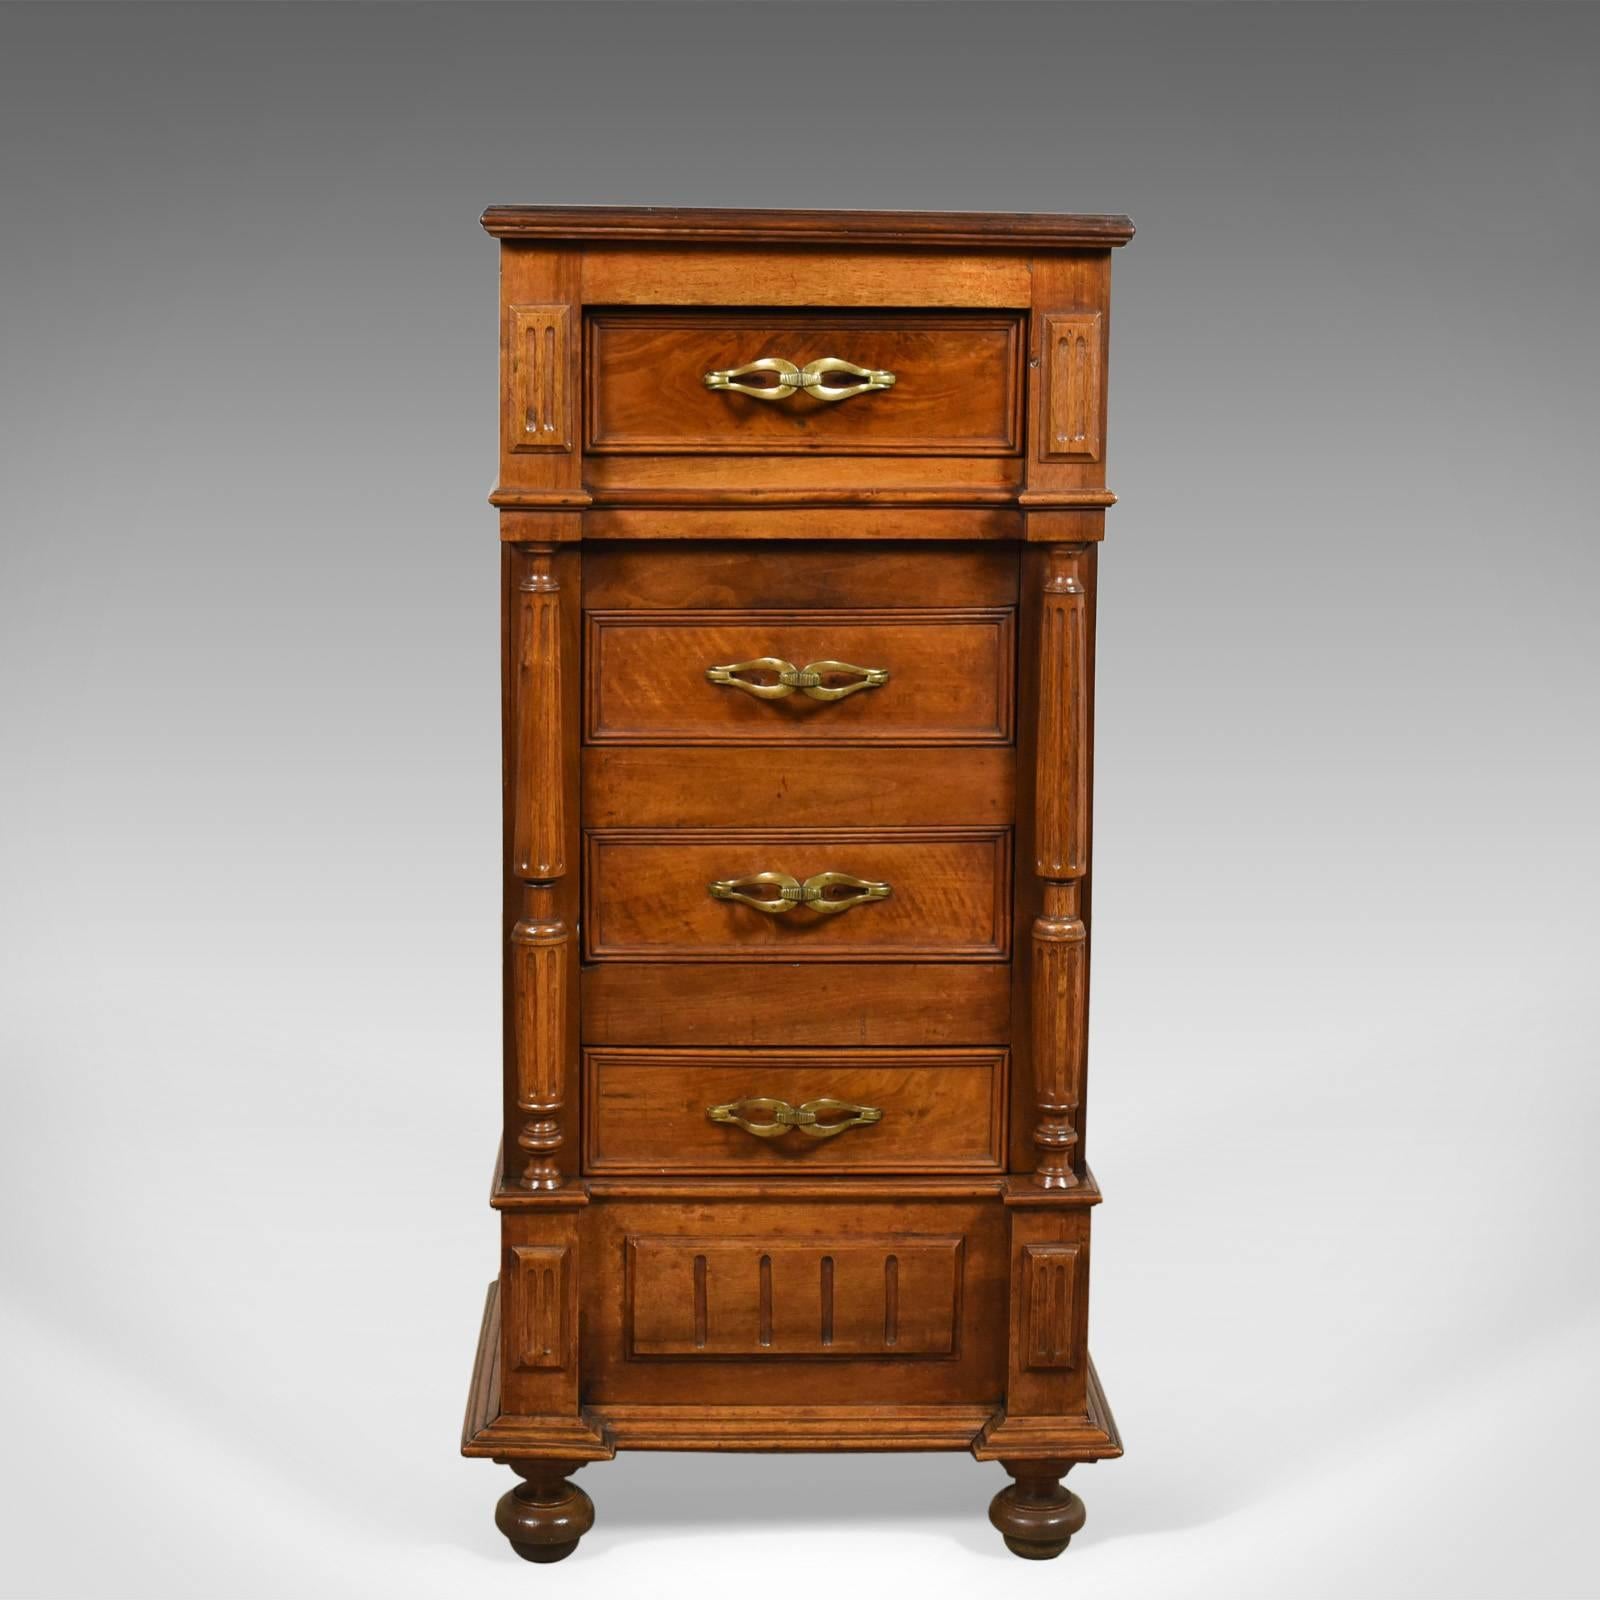 This is a French antique side cabinet, a narrow pot cupboard or nightstand in walnut dating to circa 1900.

Mellow tones and grain interest to the French walnut
Breakfront design with neo-classical overtones
Raised on traditional bun feet to the